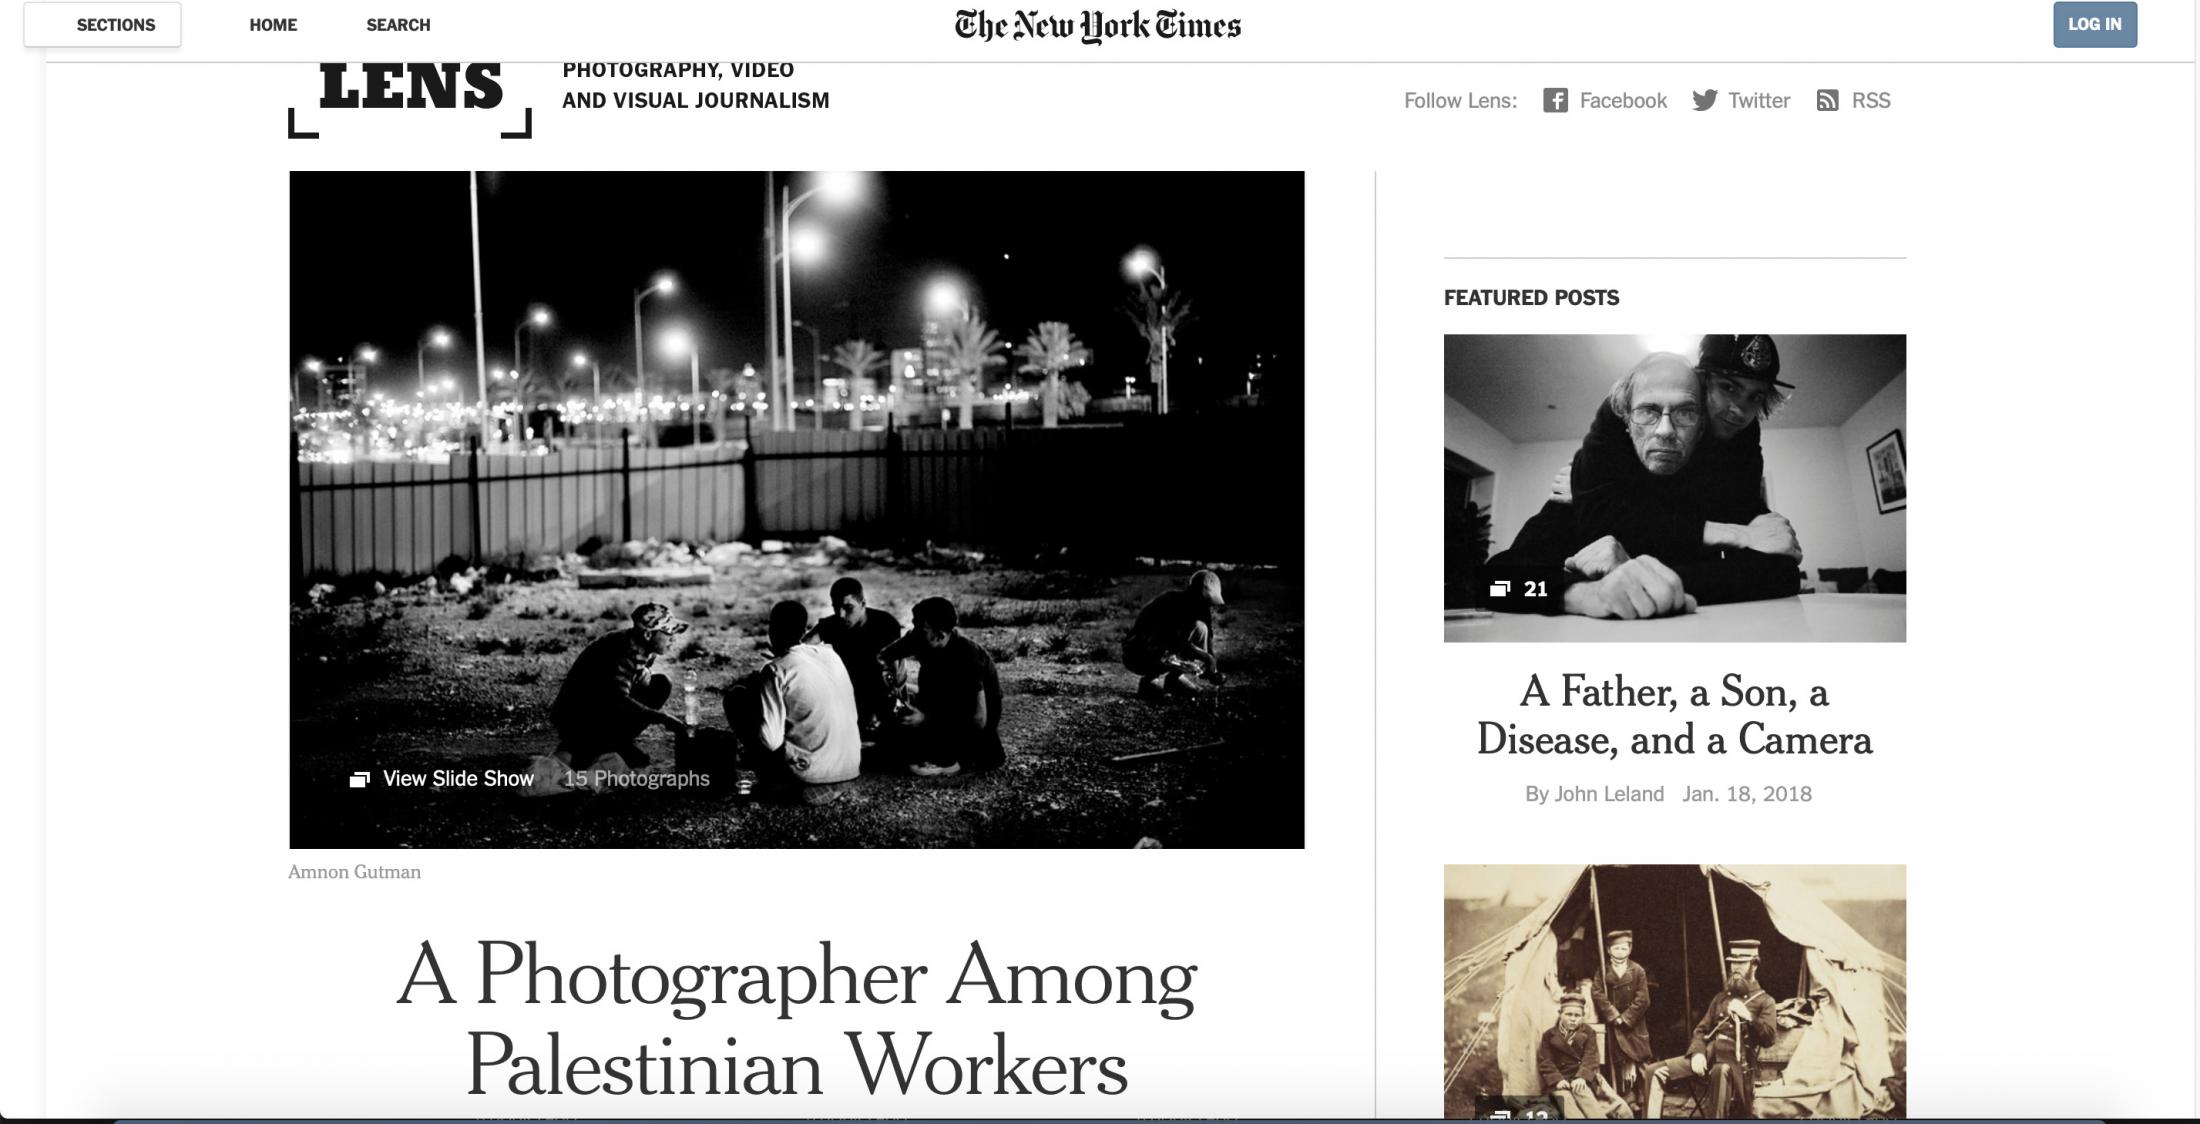 Publications - NYTimes